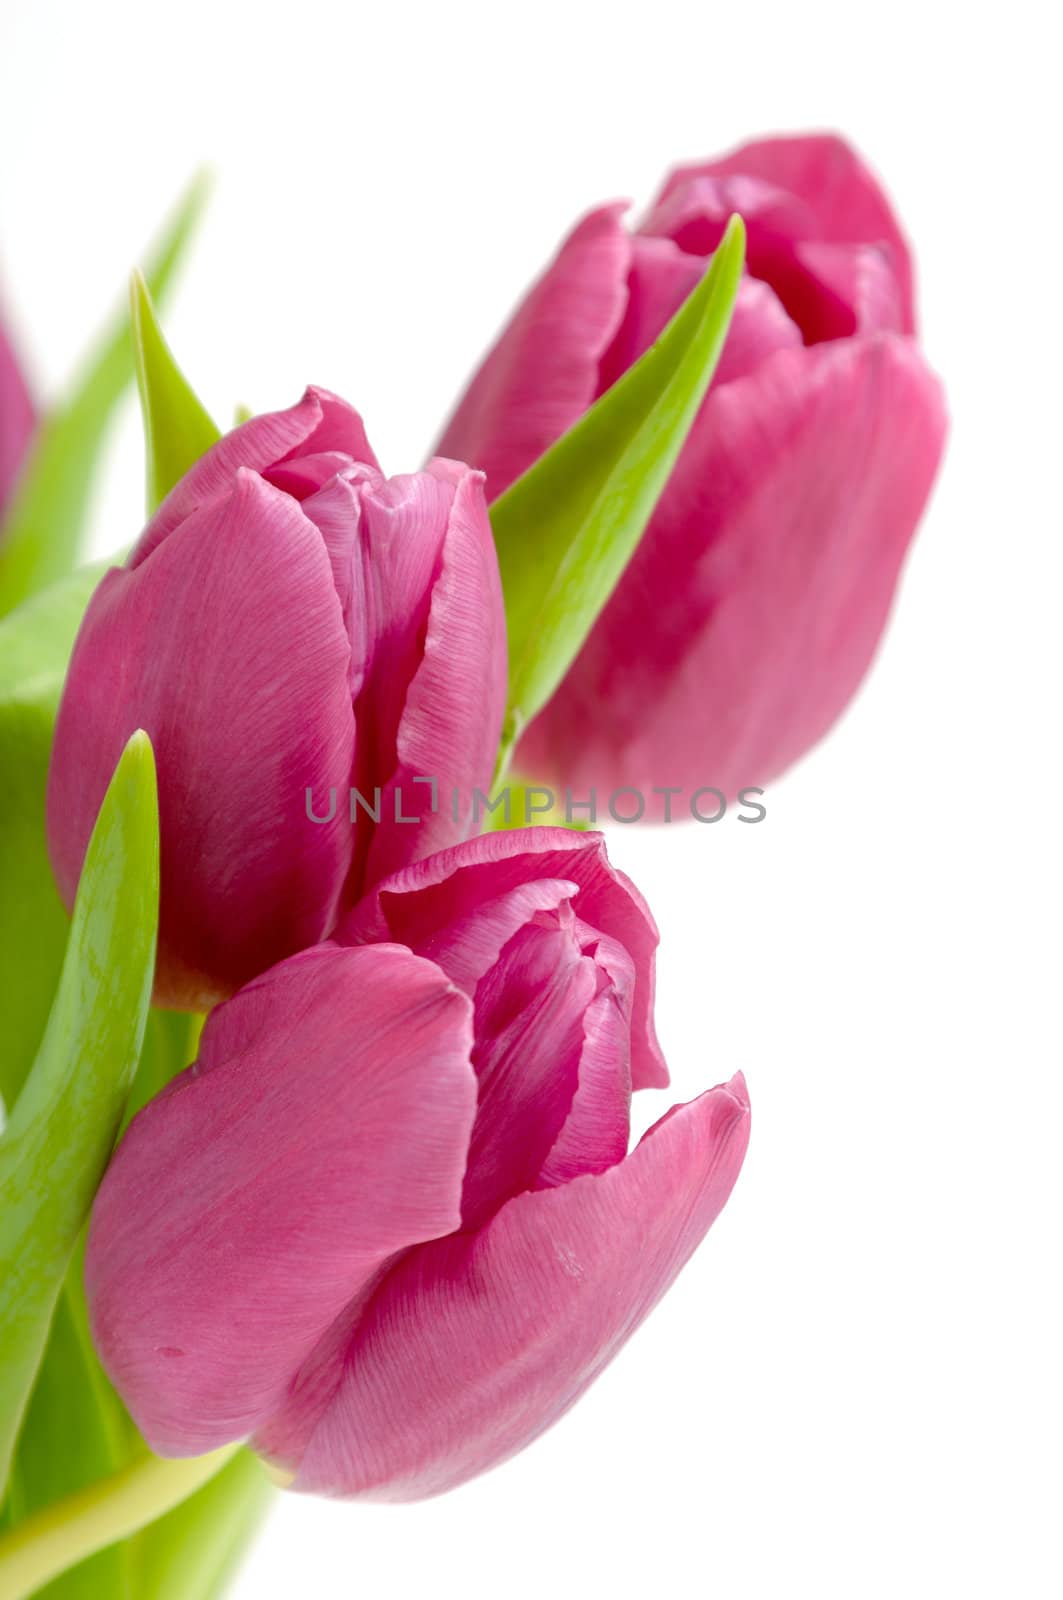 Tree pink tulips on clean white background. Focus on front tulip.